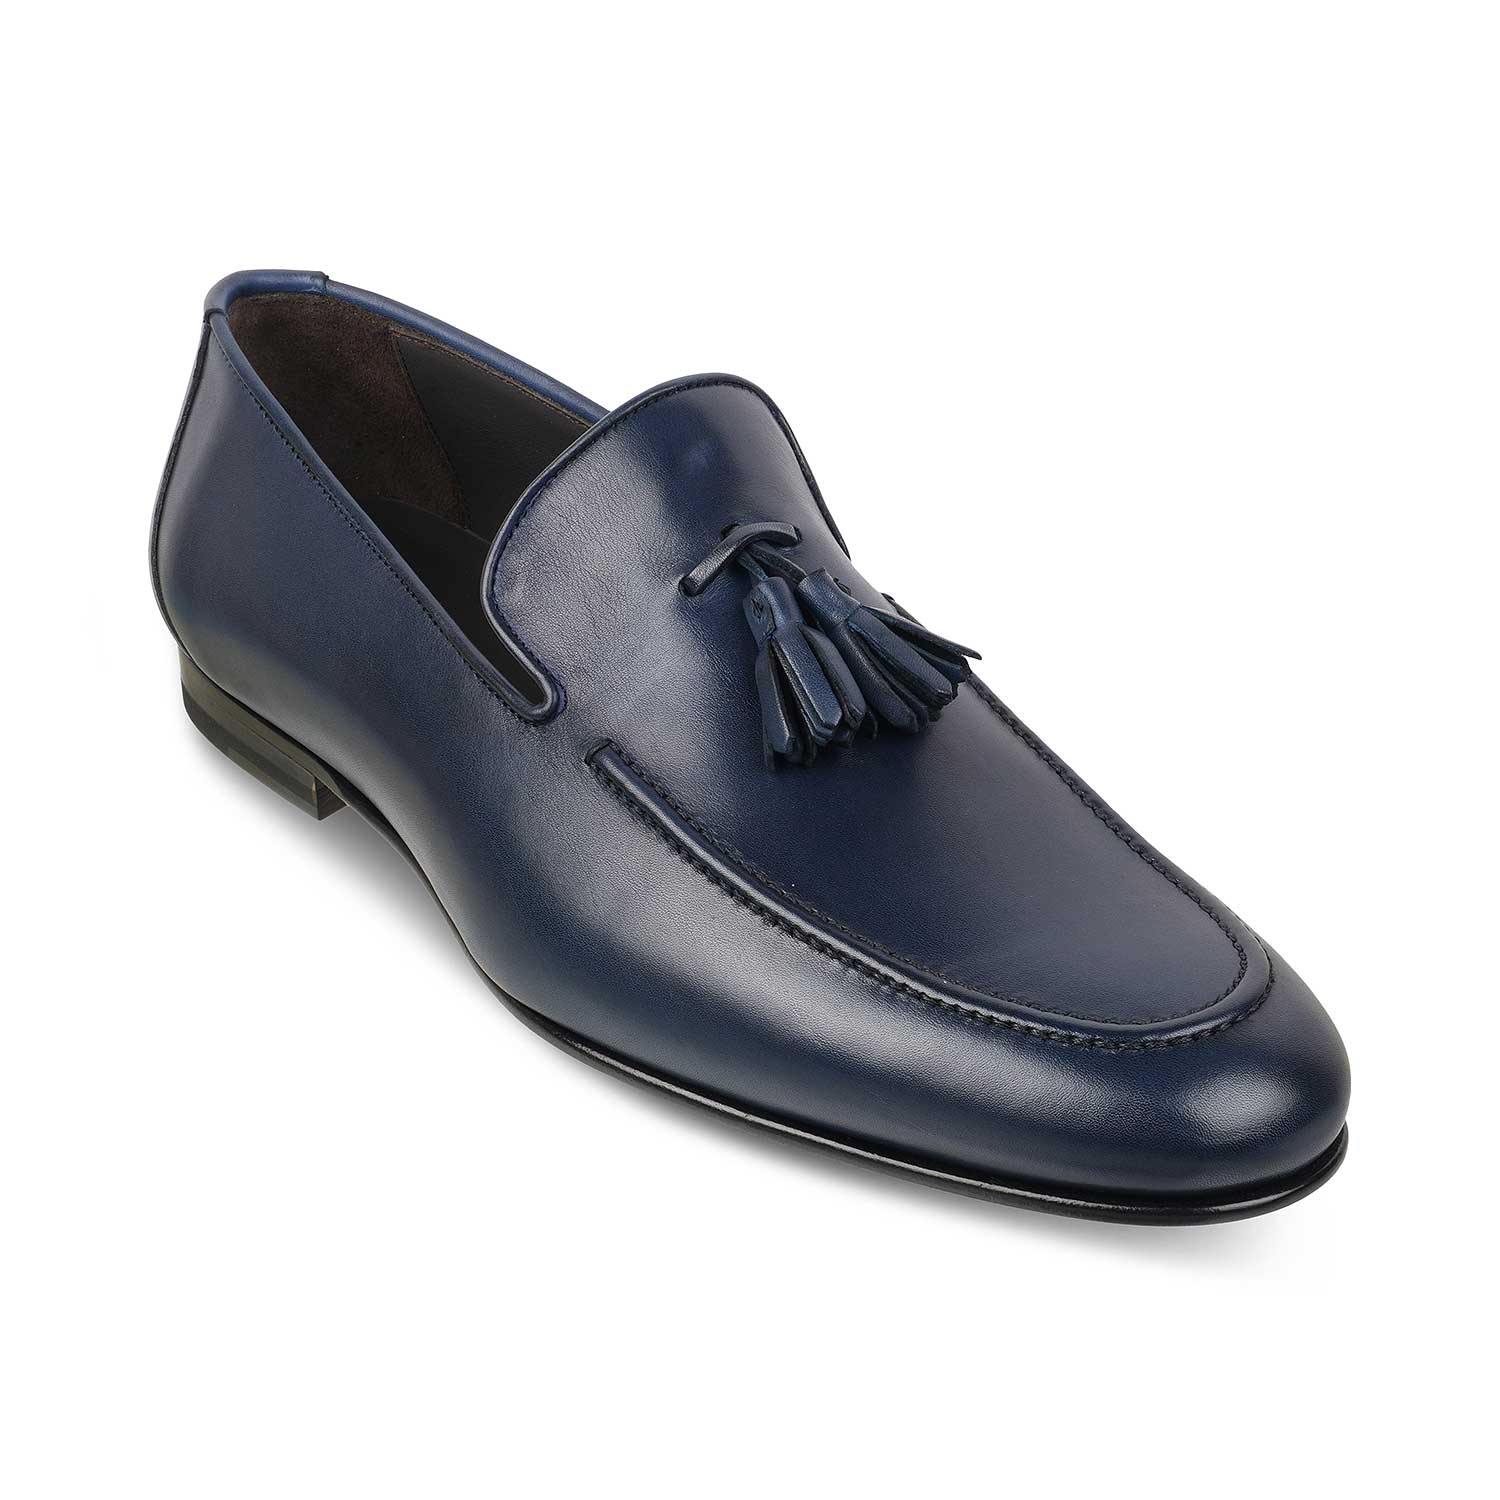 The Maffeo Blue Men's Handcrafted Leather Loafers Tresmode